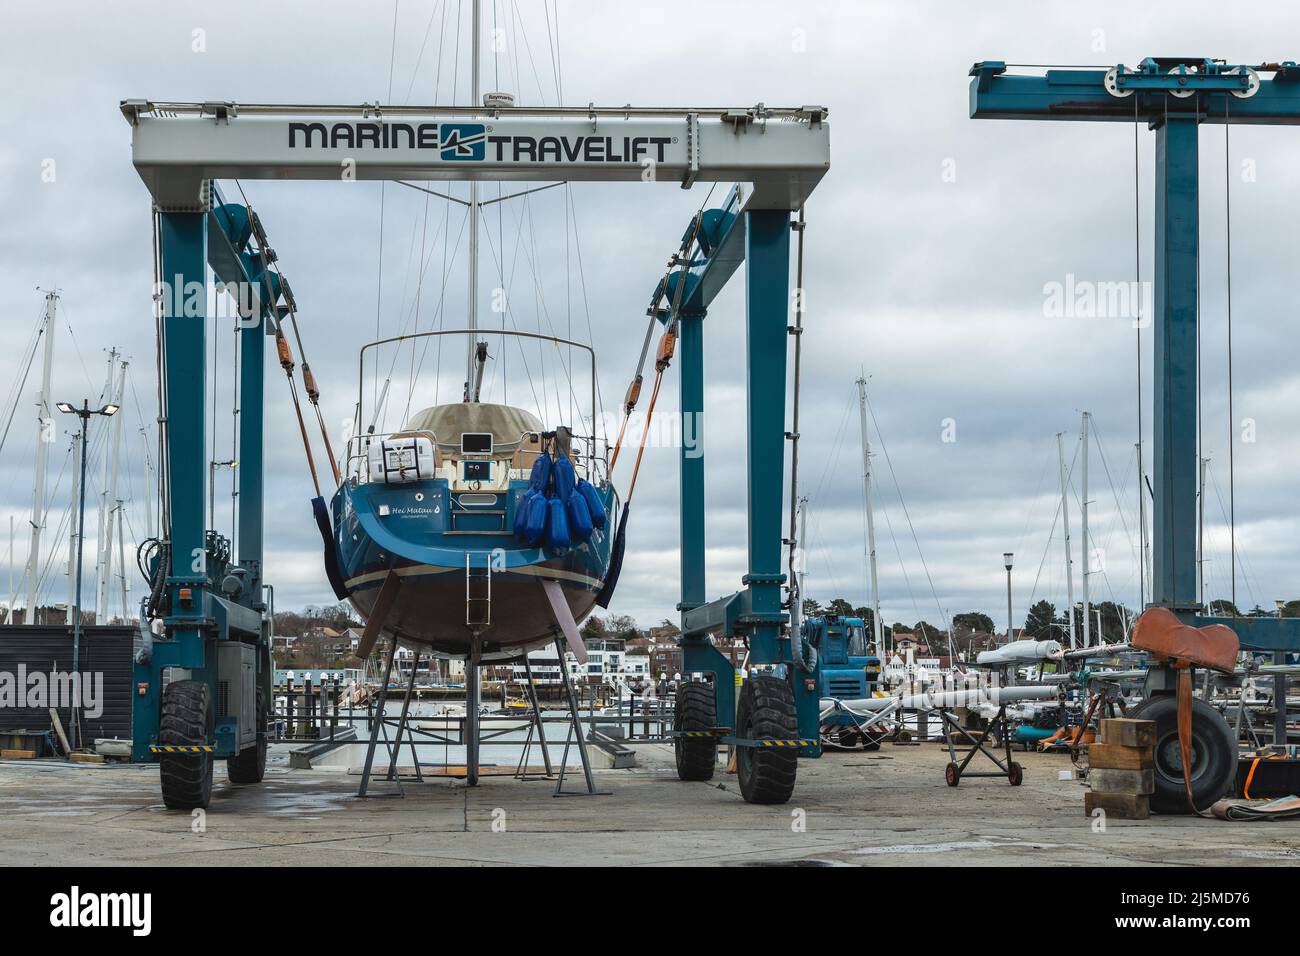 Marina heavy industrial boat lift equipment, the marine travelift can lift in excess of 25-100 tons to facilitate maintenance of sail boats and yacht Stock Photo